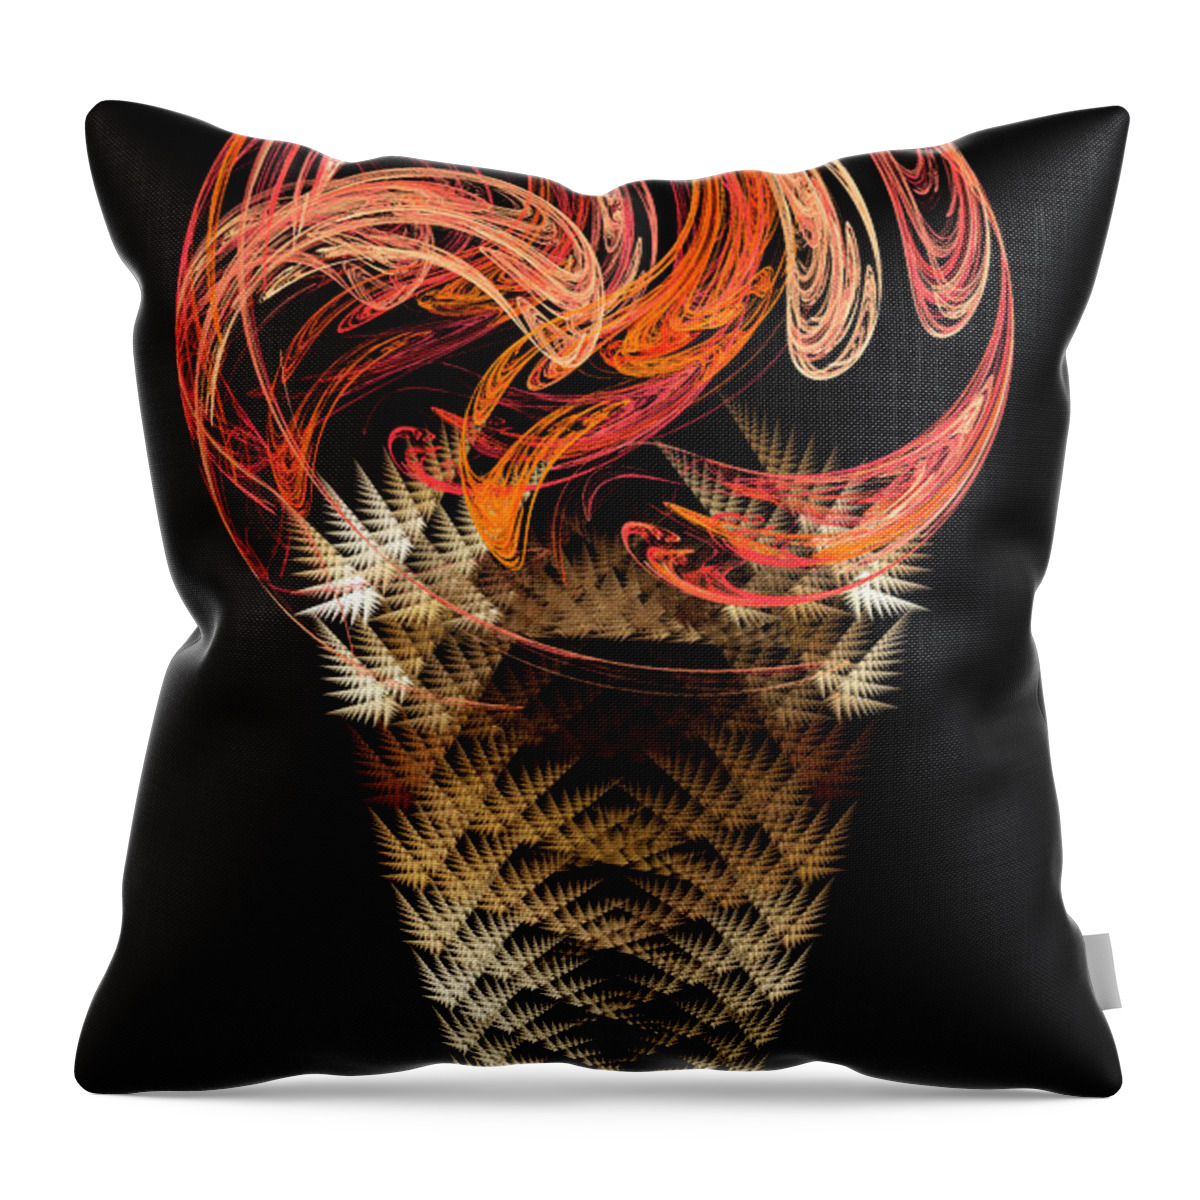 Food Throw Pillow featuring the digital art Orange Ice Cream Cone by Andee Design